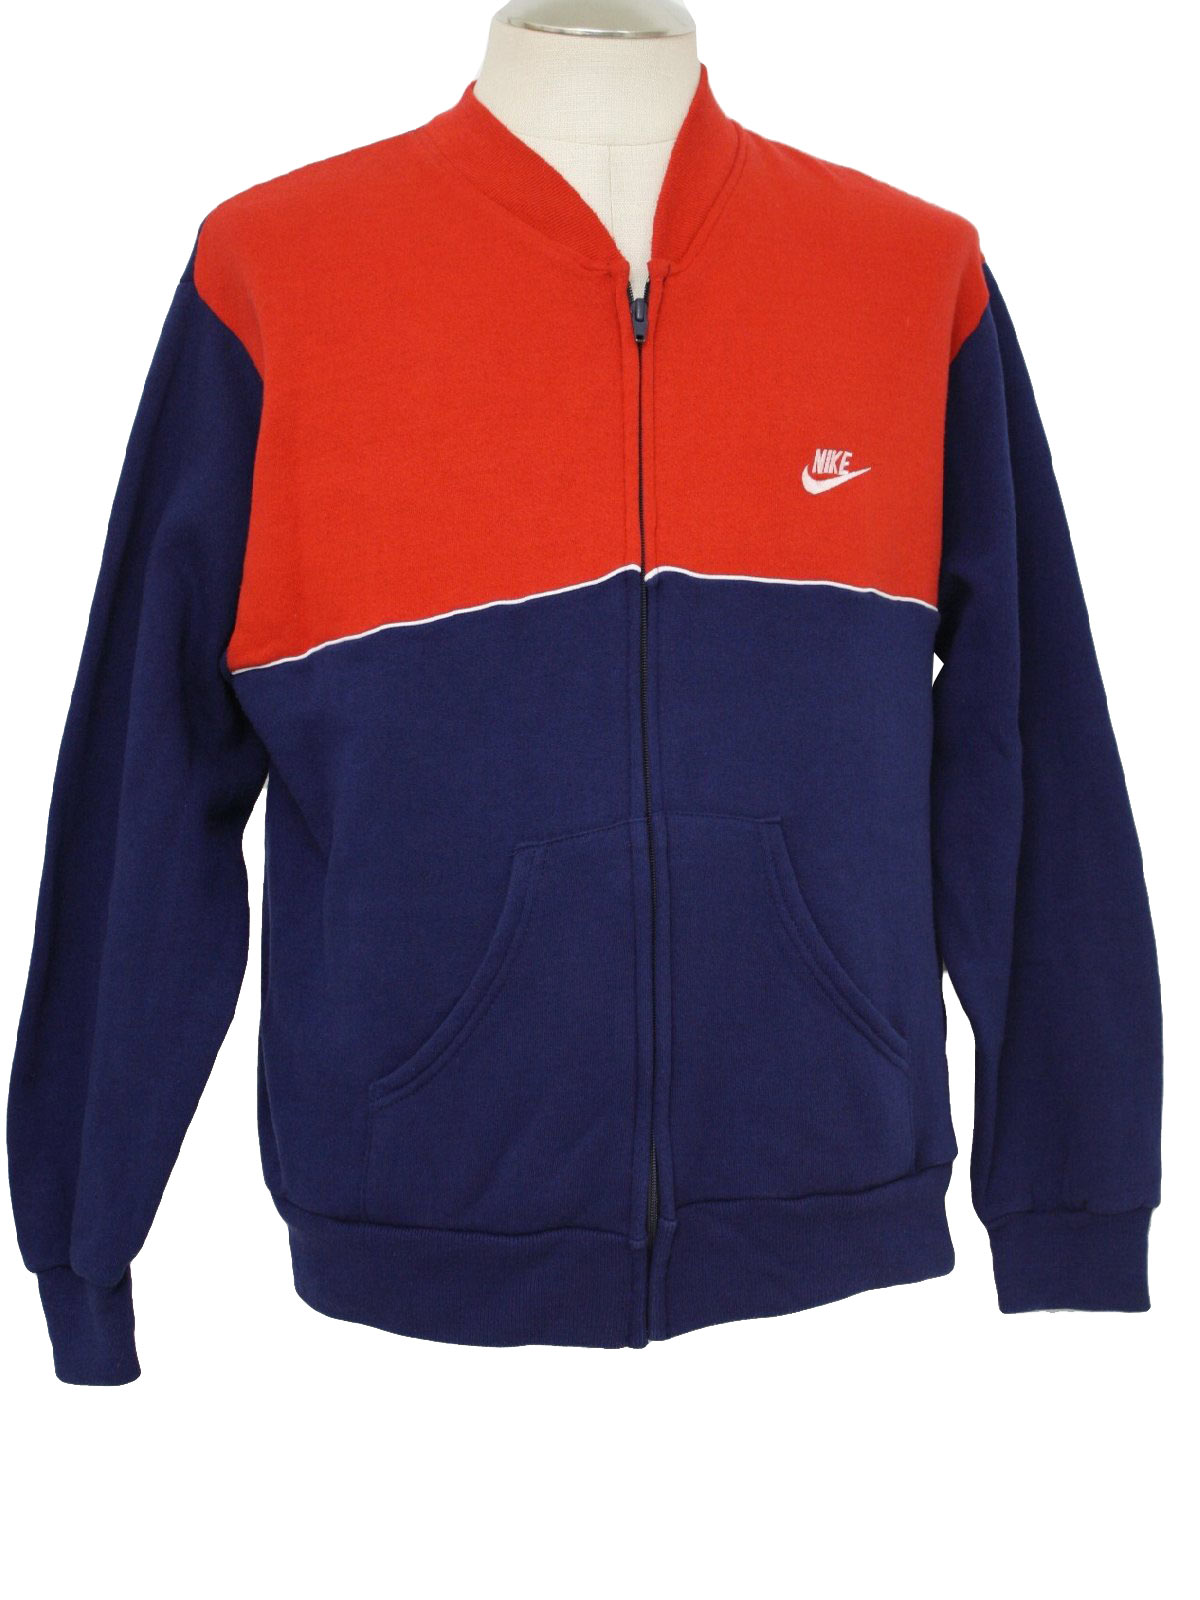 1980s Nike Jacket: 80s -Nike- Mens red, blue and white zipping track ...